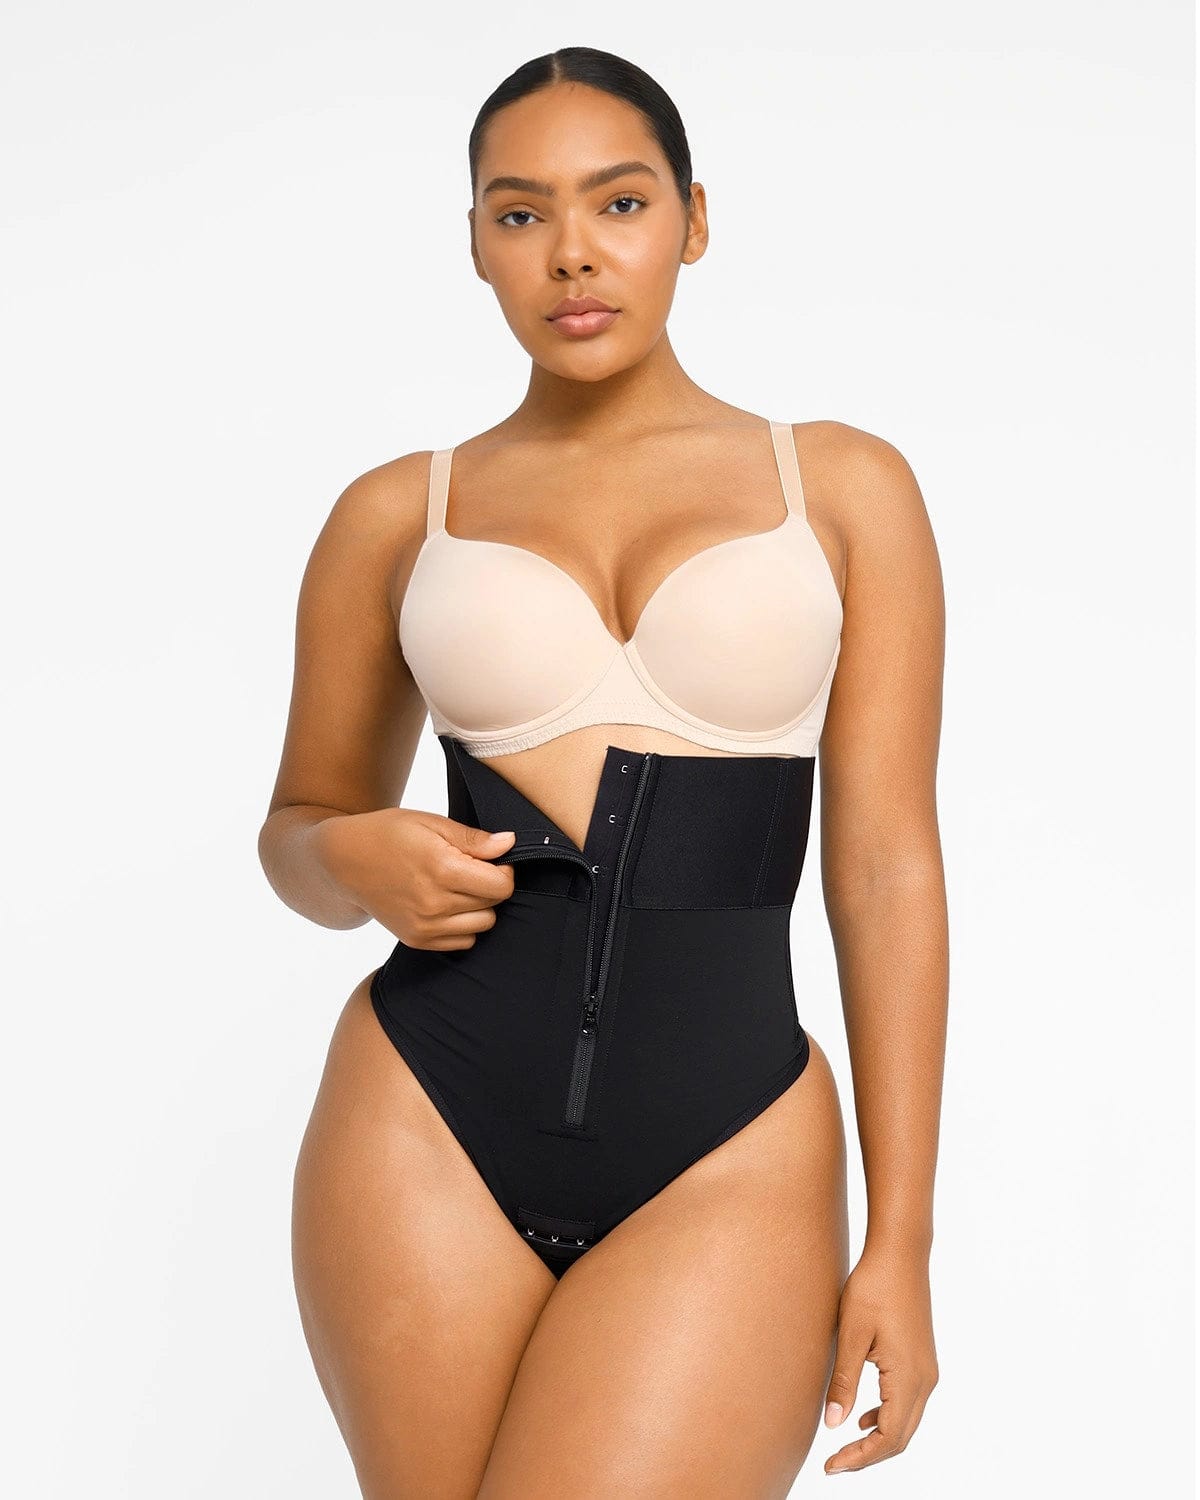 Buy Standard Quality China Wholesale Wholesale Female Butt Lifter Plus Size Shapers  Corset Shorts High Waist Full Body Shaper For Women $11.06 Direct from  Factory at Zhengzhou Honeywell Medical Products Co.,Ltd